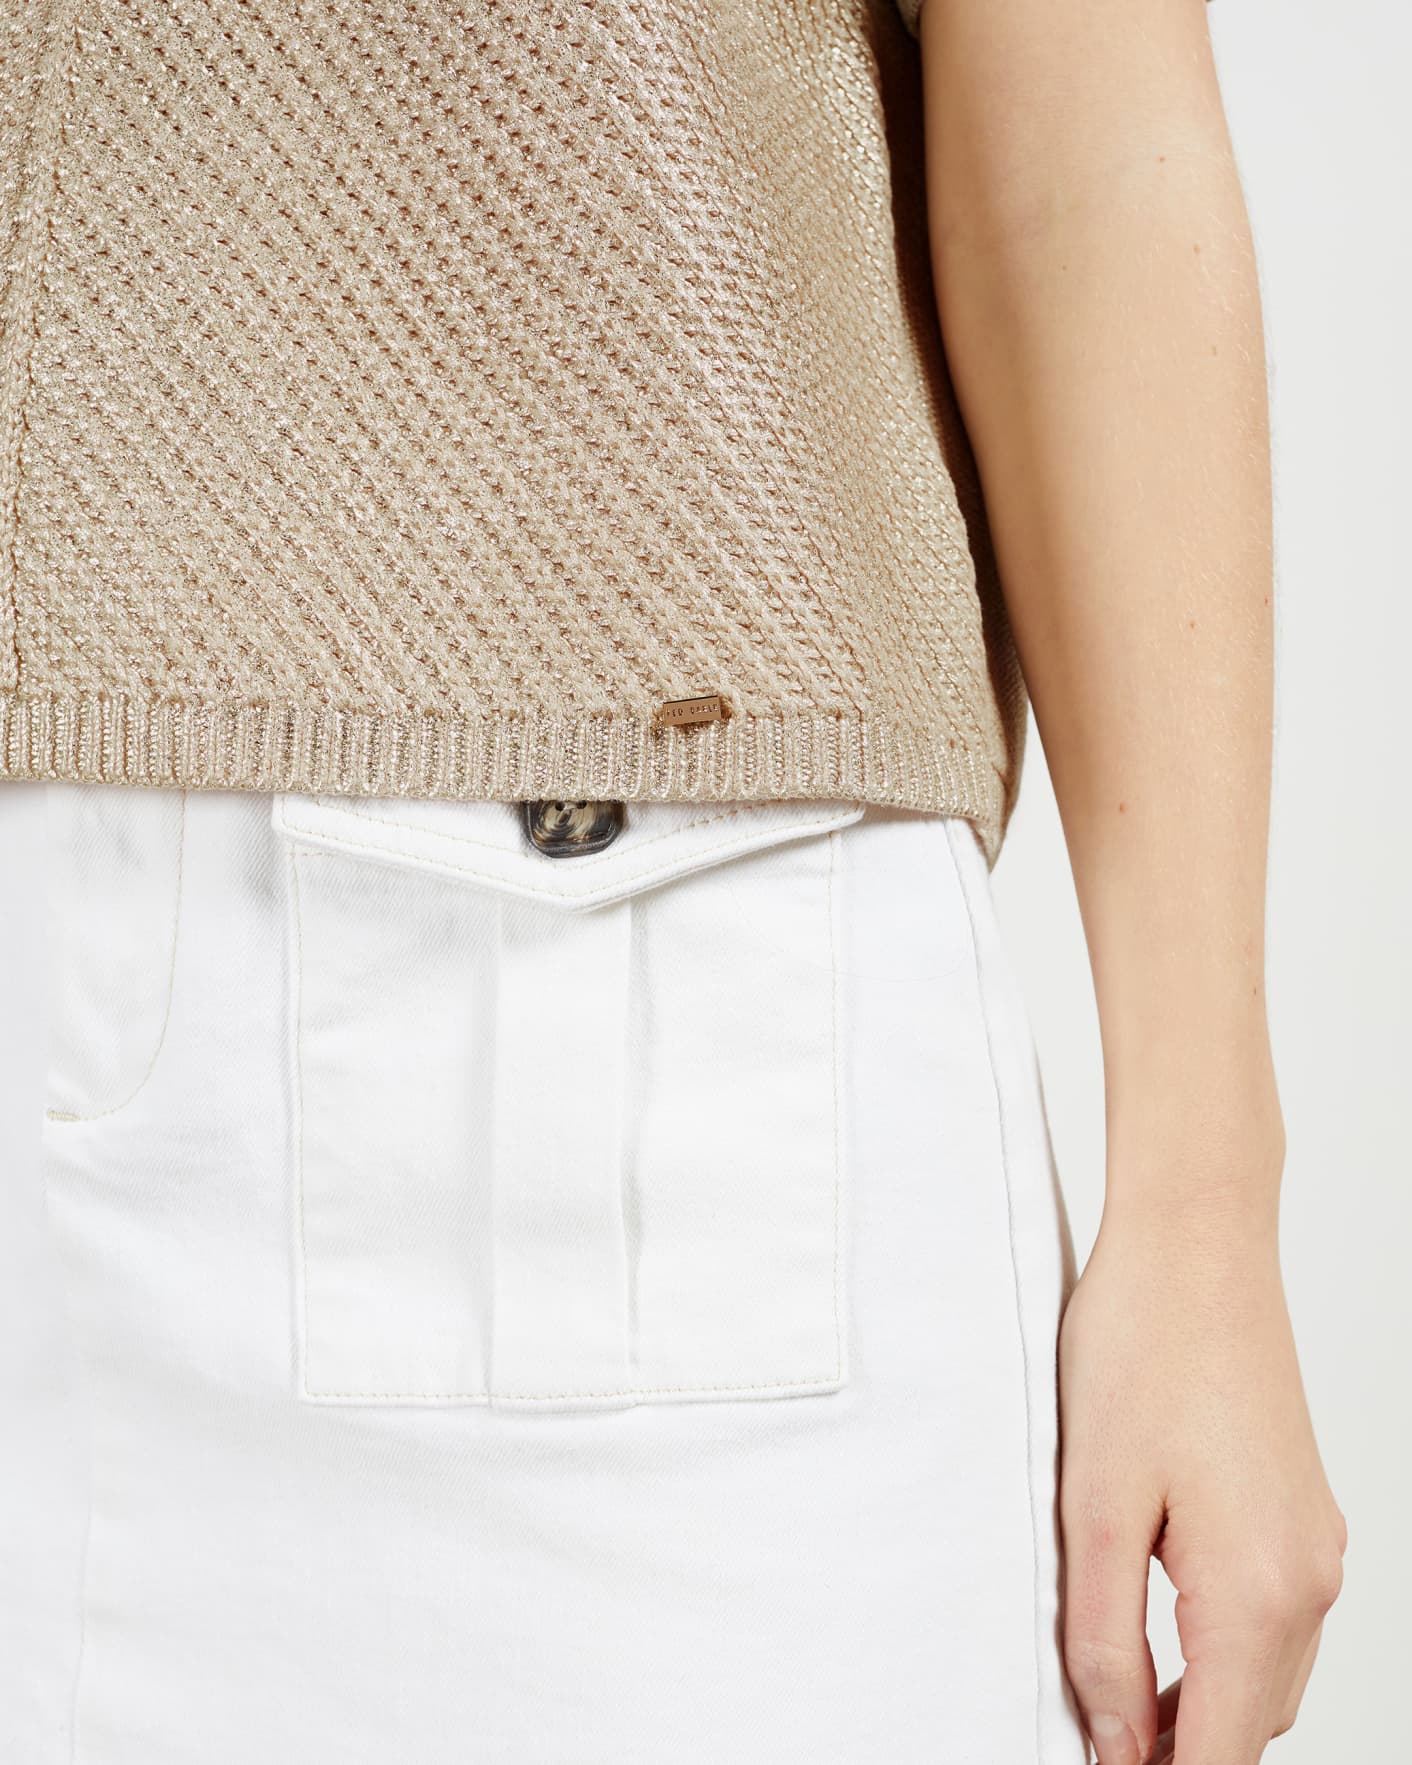 Metallic Relaxed Metallic Knitted Top Ted Baker